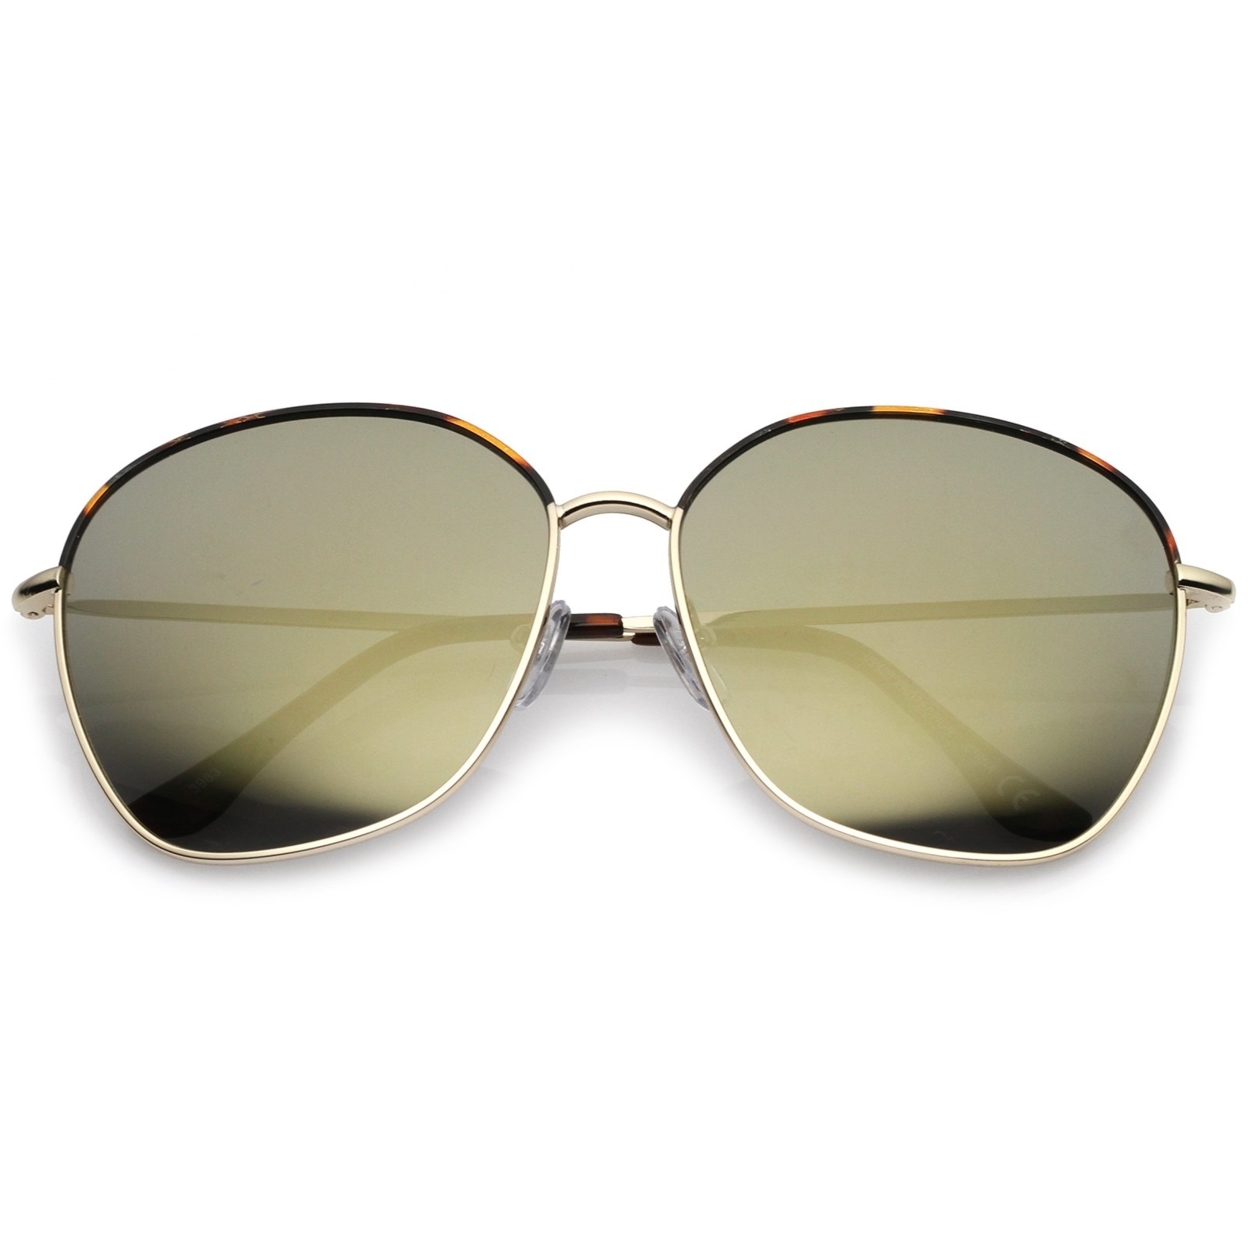 Mod Oversize Two-Toned Metal Frame Slim Temples Square Sunglasses 61mm - Tortoise-Gold / Smoke Gradient